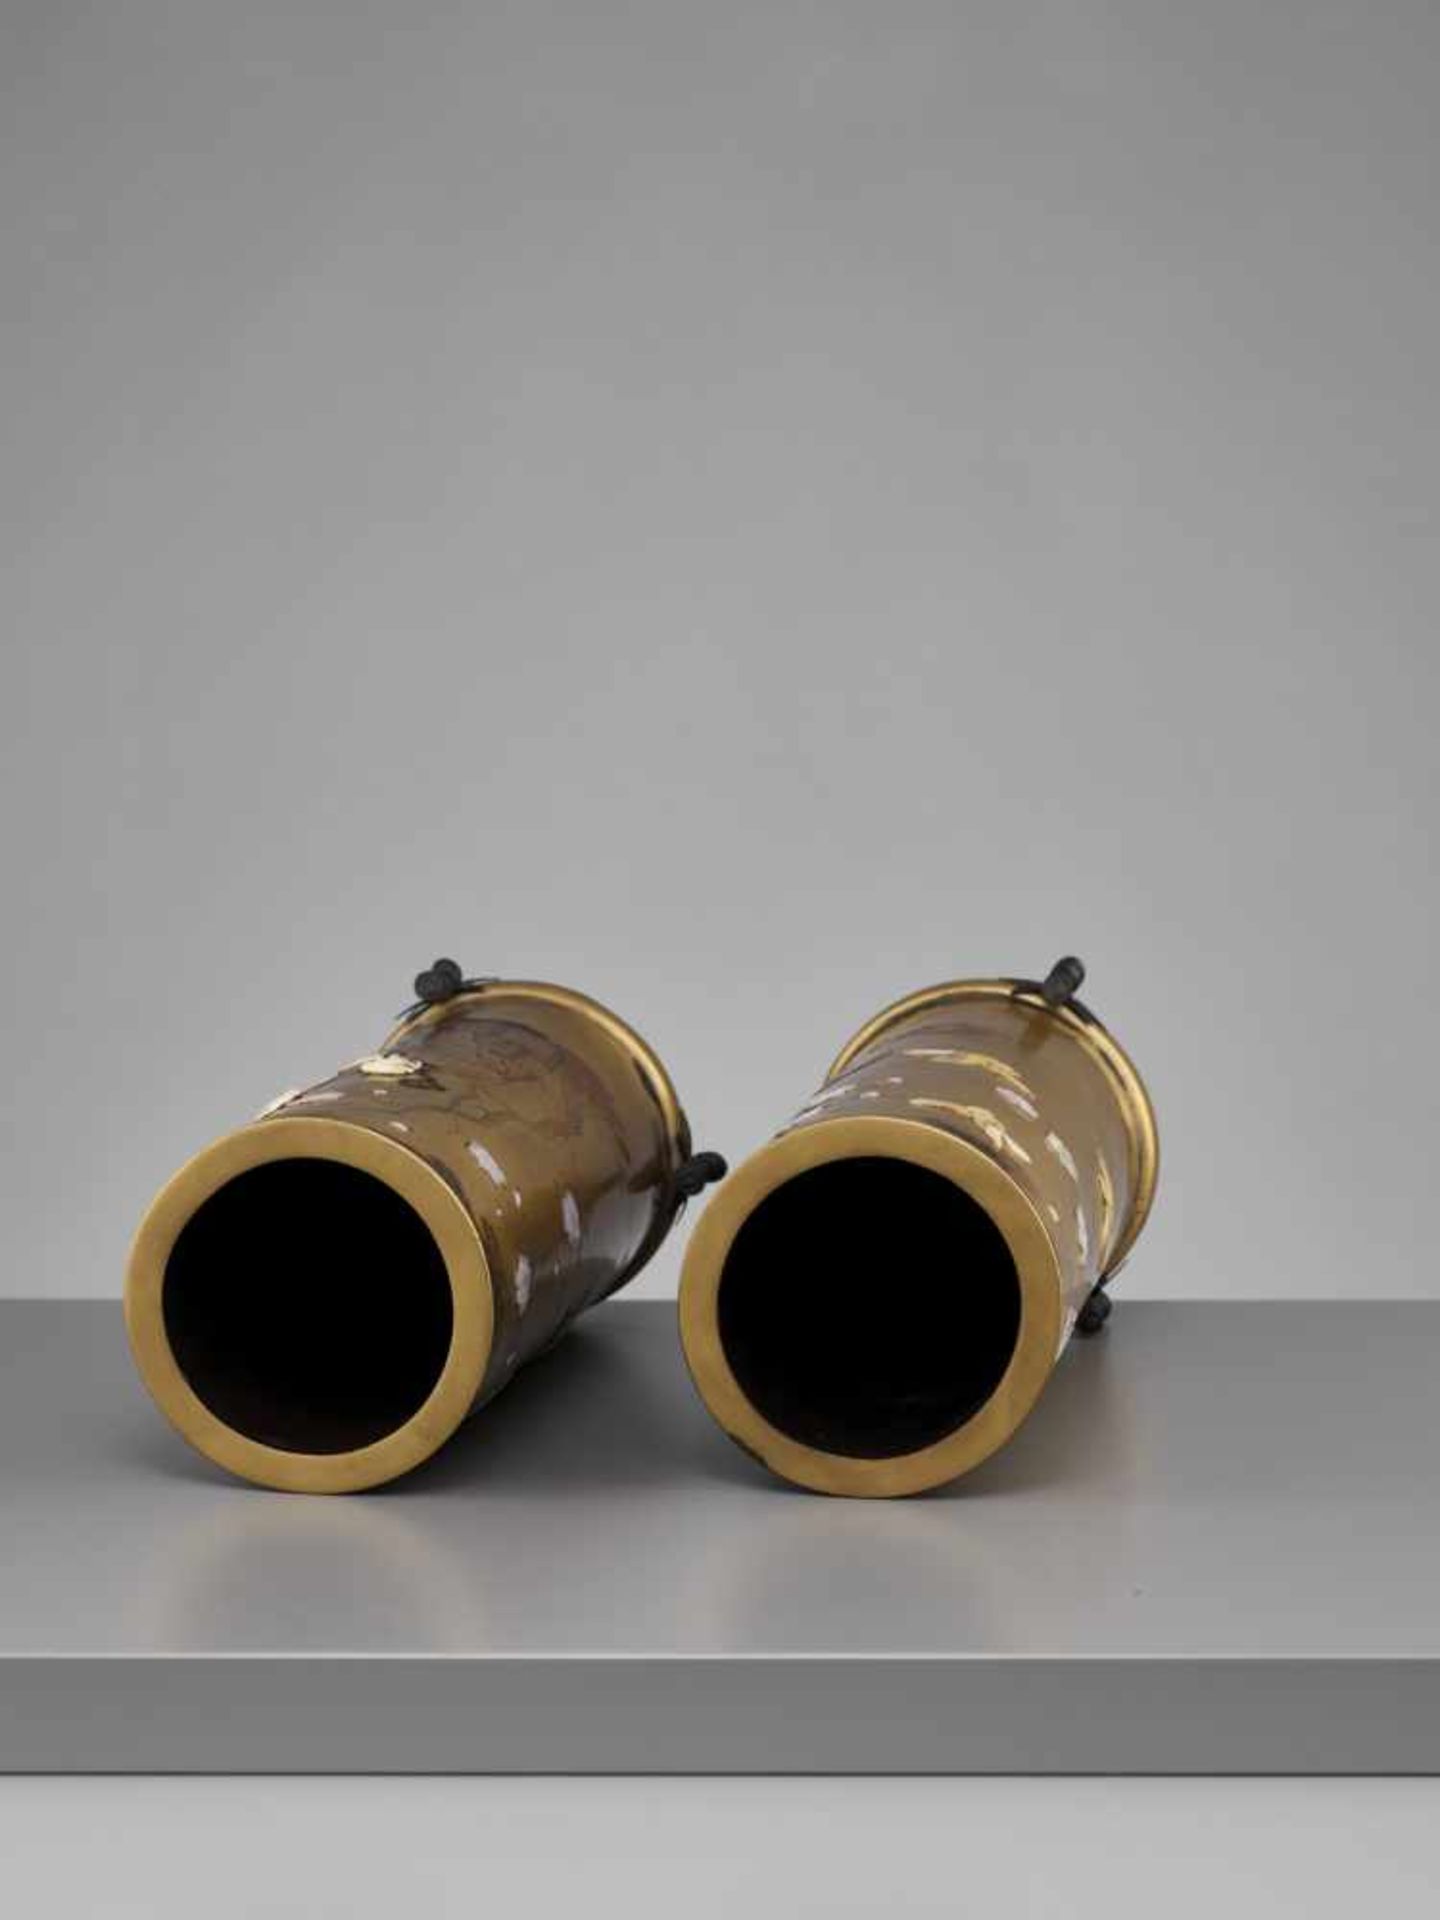 A FINE PAIR OF LACQUERED WOOD AND SHIBAYAMA VASES WITH RAKAN - Image 9 of 13